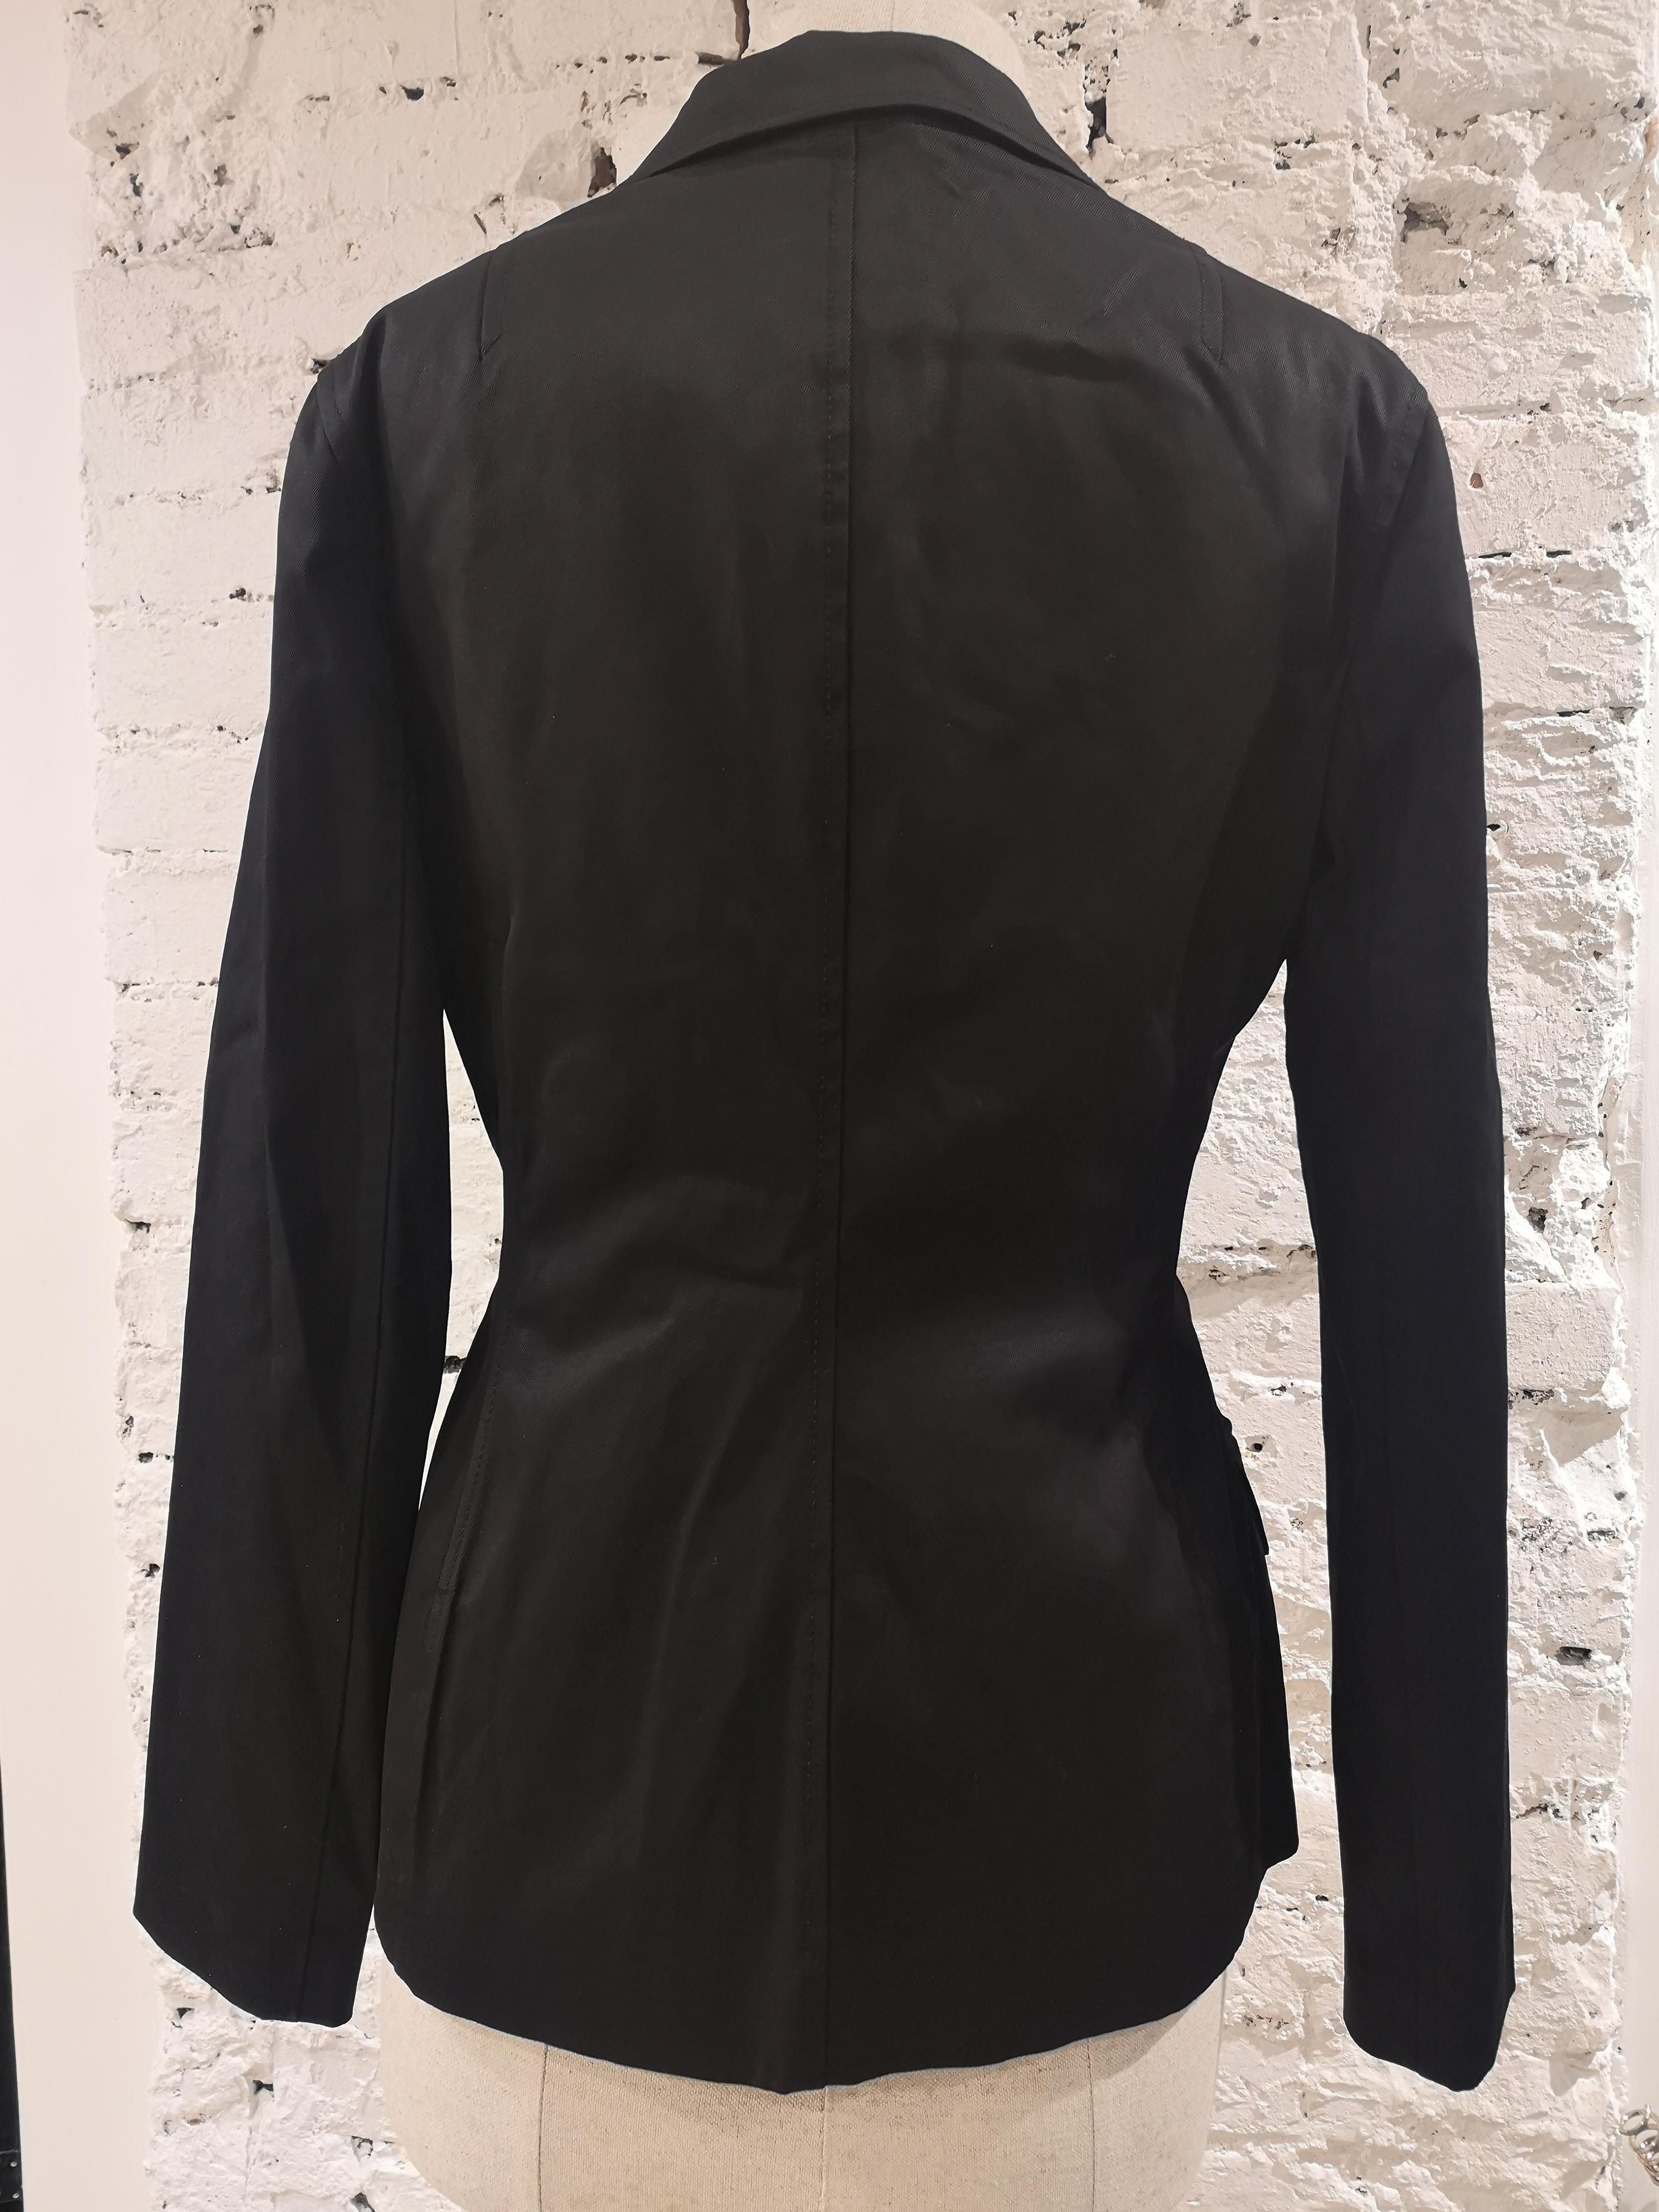 Dolce & Gabbana black jacket In Excellent Condition For Sale In Capri, IT